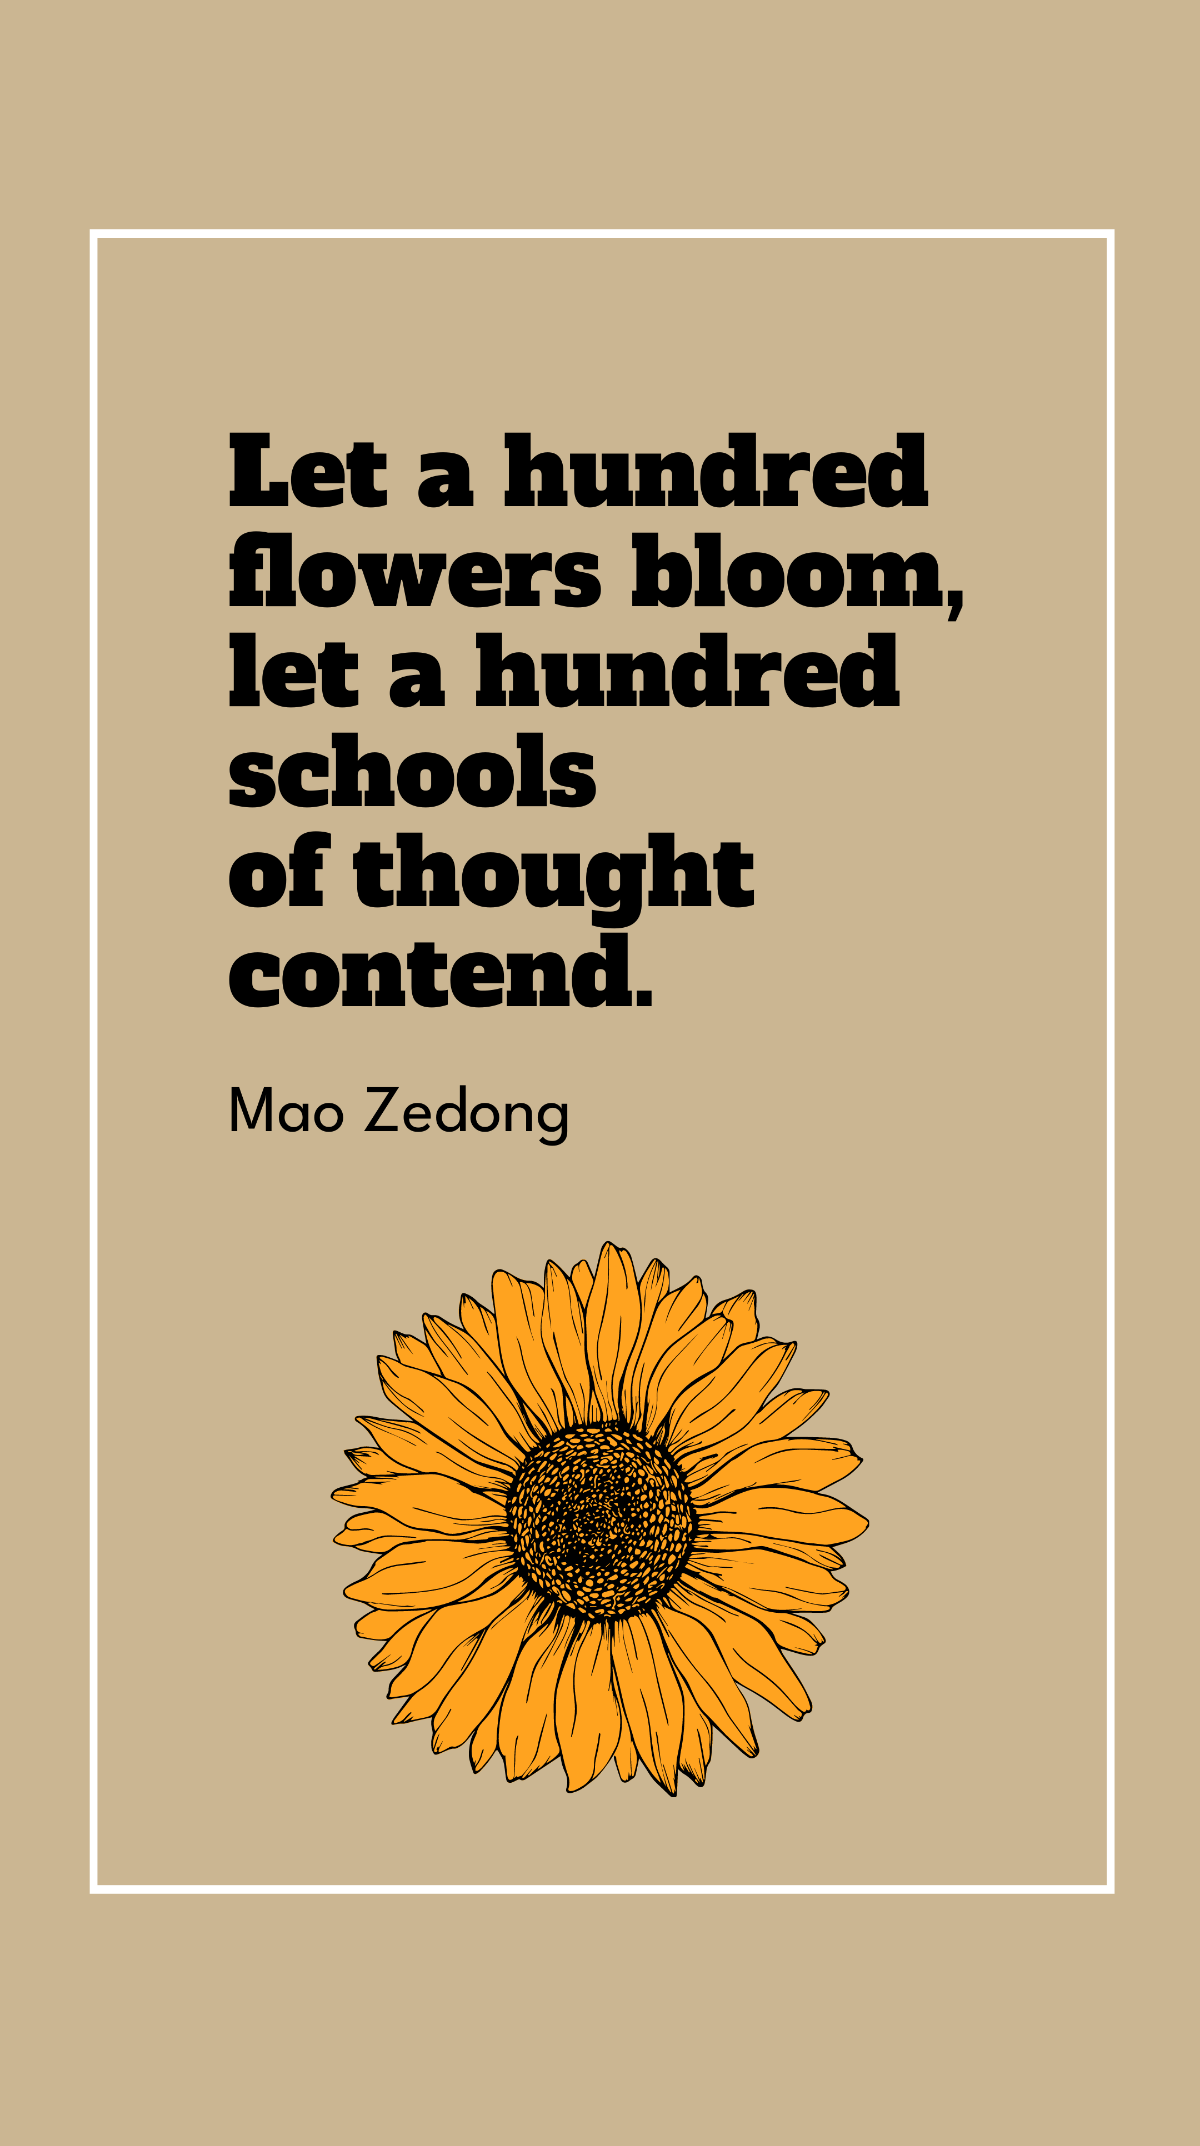 Free Mao Zedong - Let a hundred flowers bloom, let a hundred schools of thought contend. Template